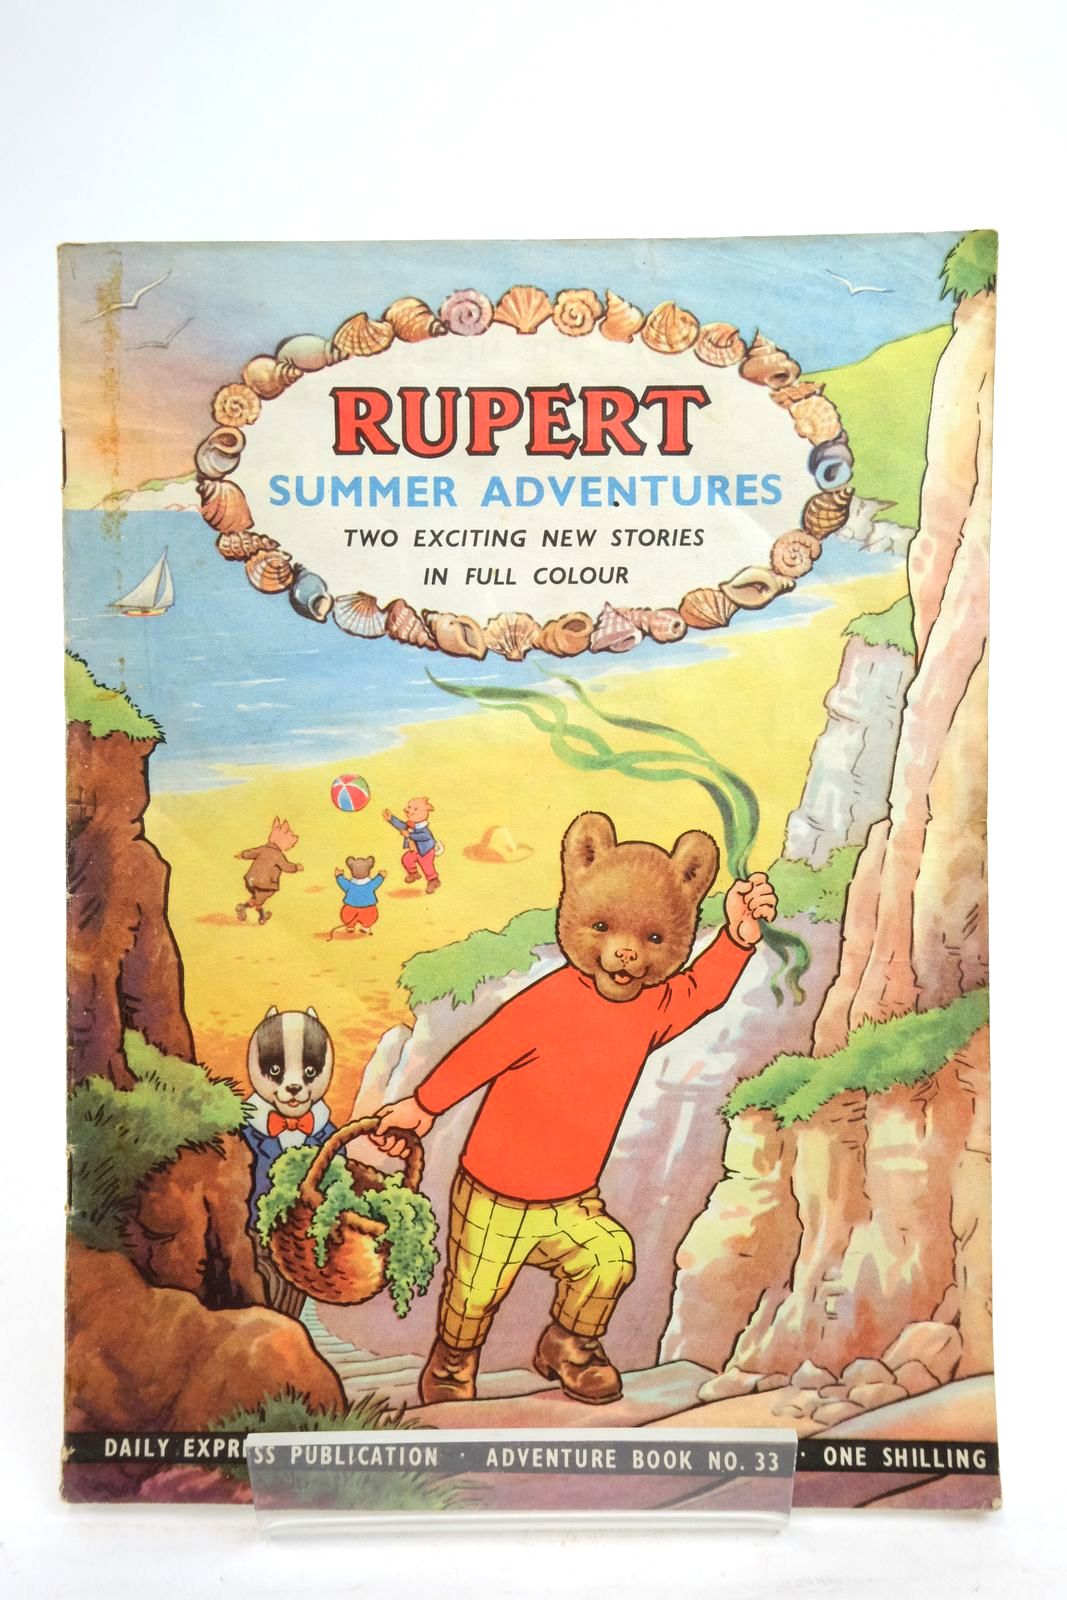 Photo of RUPERT ADVENTURE BOOK No. 33 - SUMMER ADVENTURES written by Bestall, Alfred published by Daily Express, Oldbourne Book Co. Ltd. (STOCK CODE: 2137192)  for sale by Stella & Rose's Books